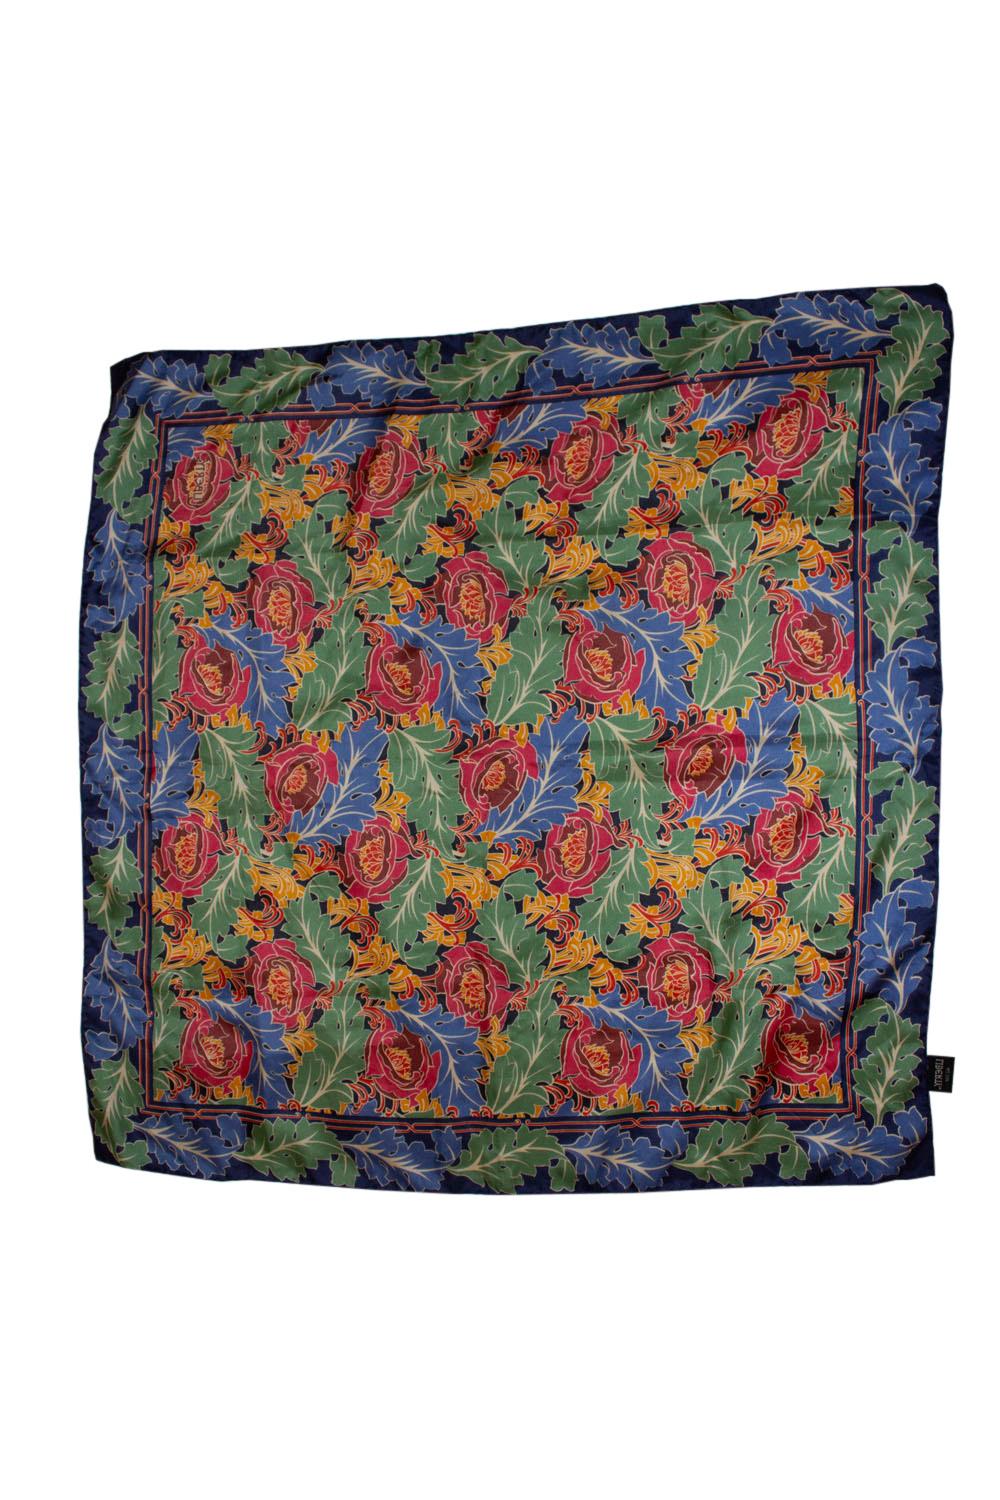 Women's or Men's Vintage Liberty Silk Scarf with Leaf Print For Sale